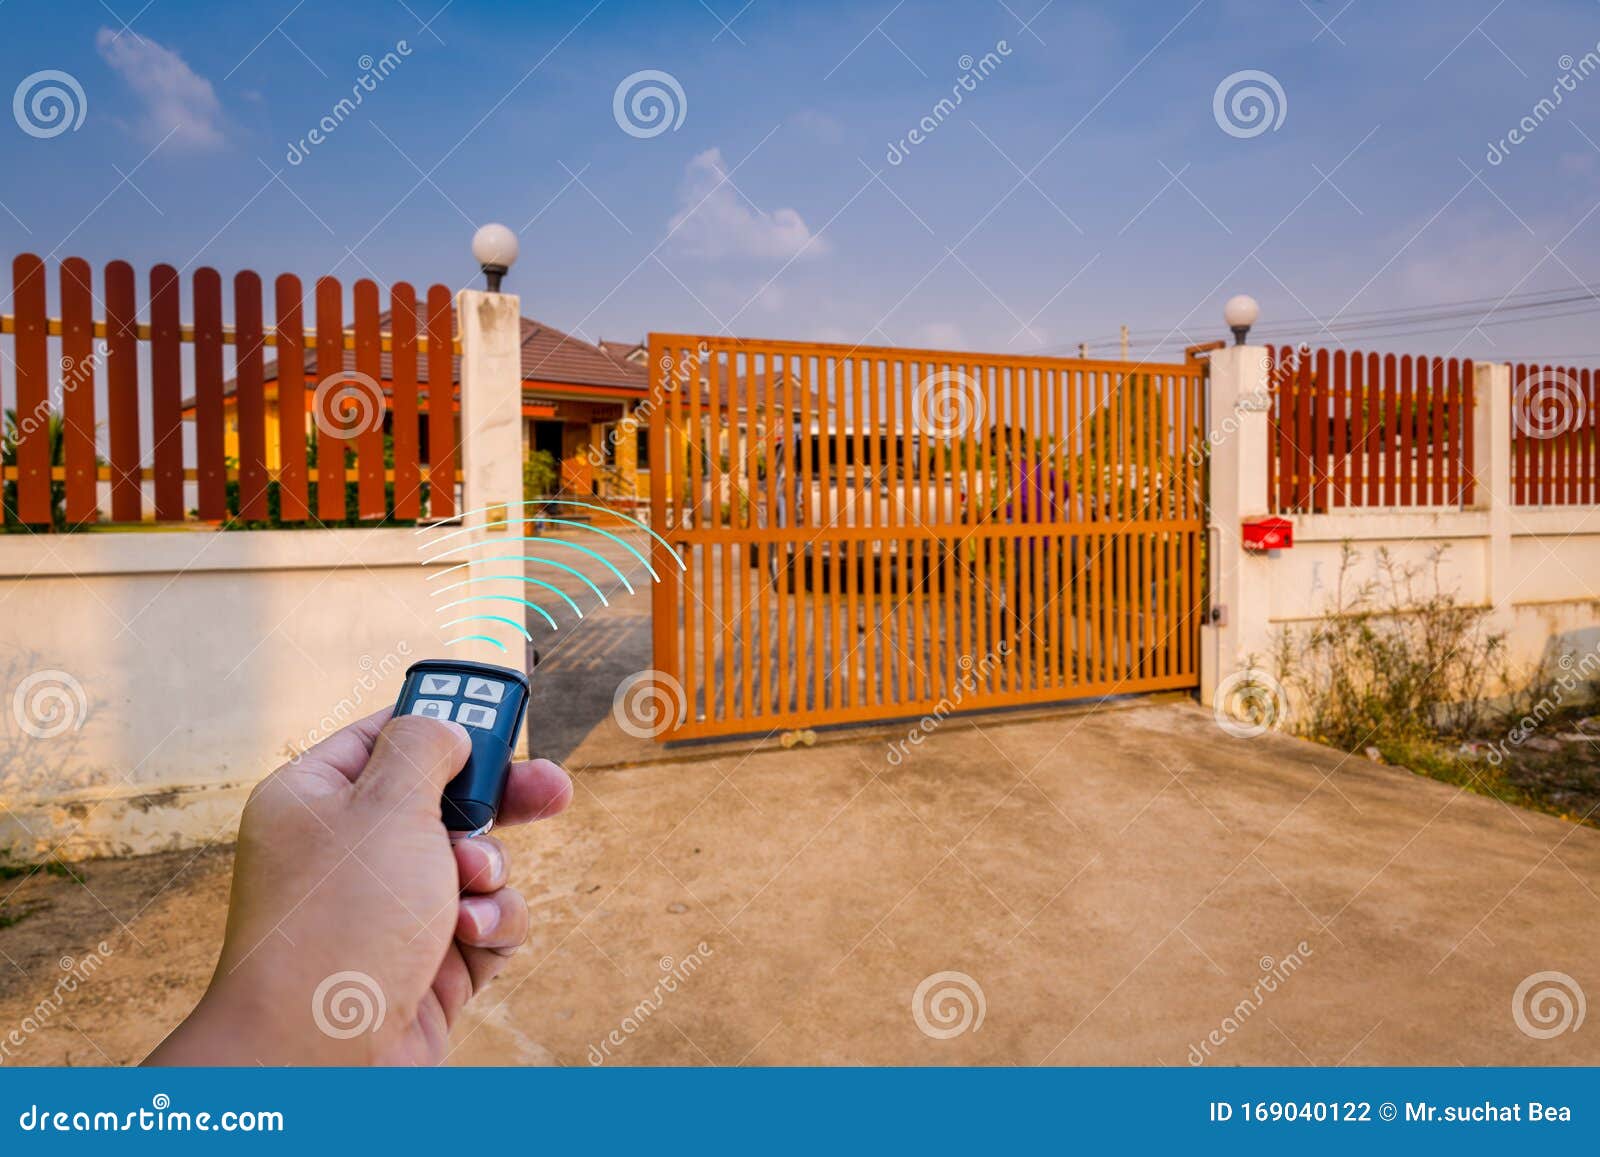 a signal of remote control show when person open automatic gate at home,motor automatic gate